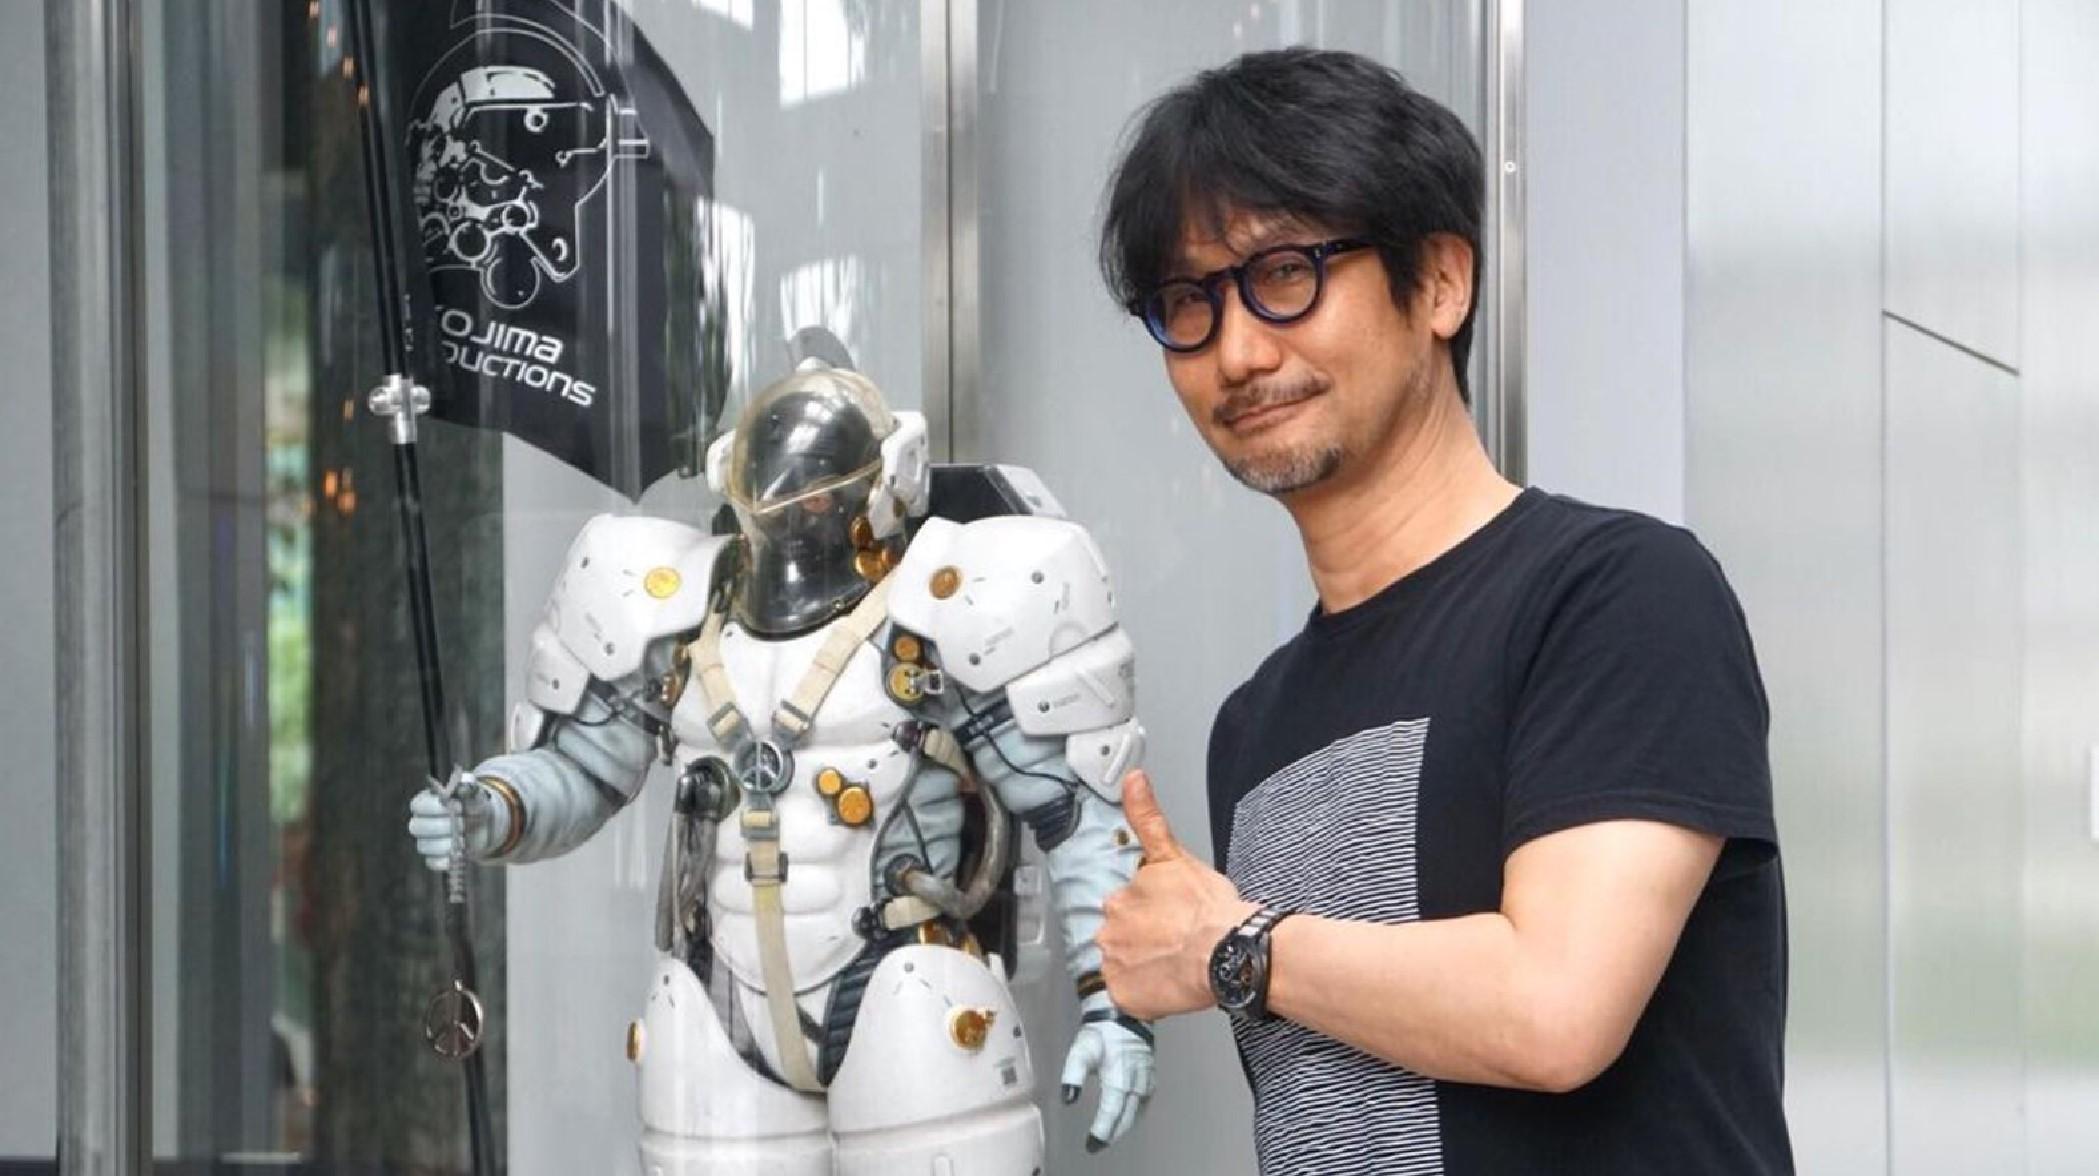 Hideo Kojima teases mystery project on Twitter